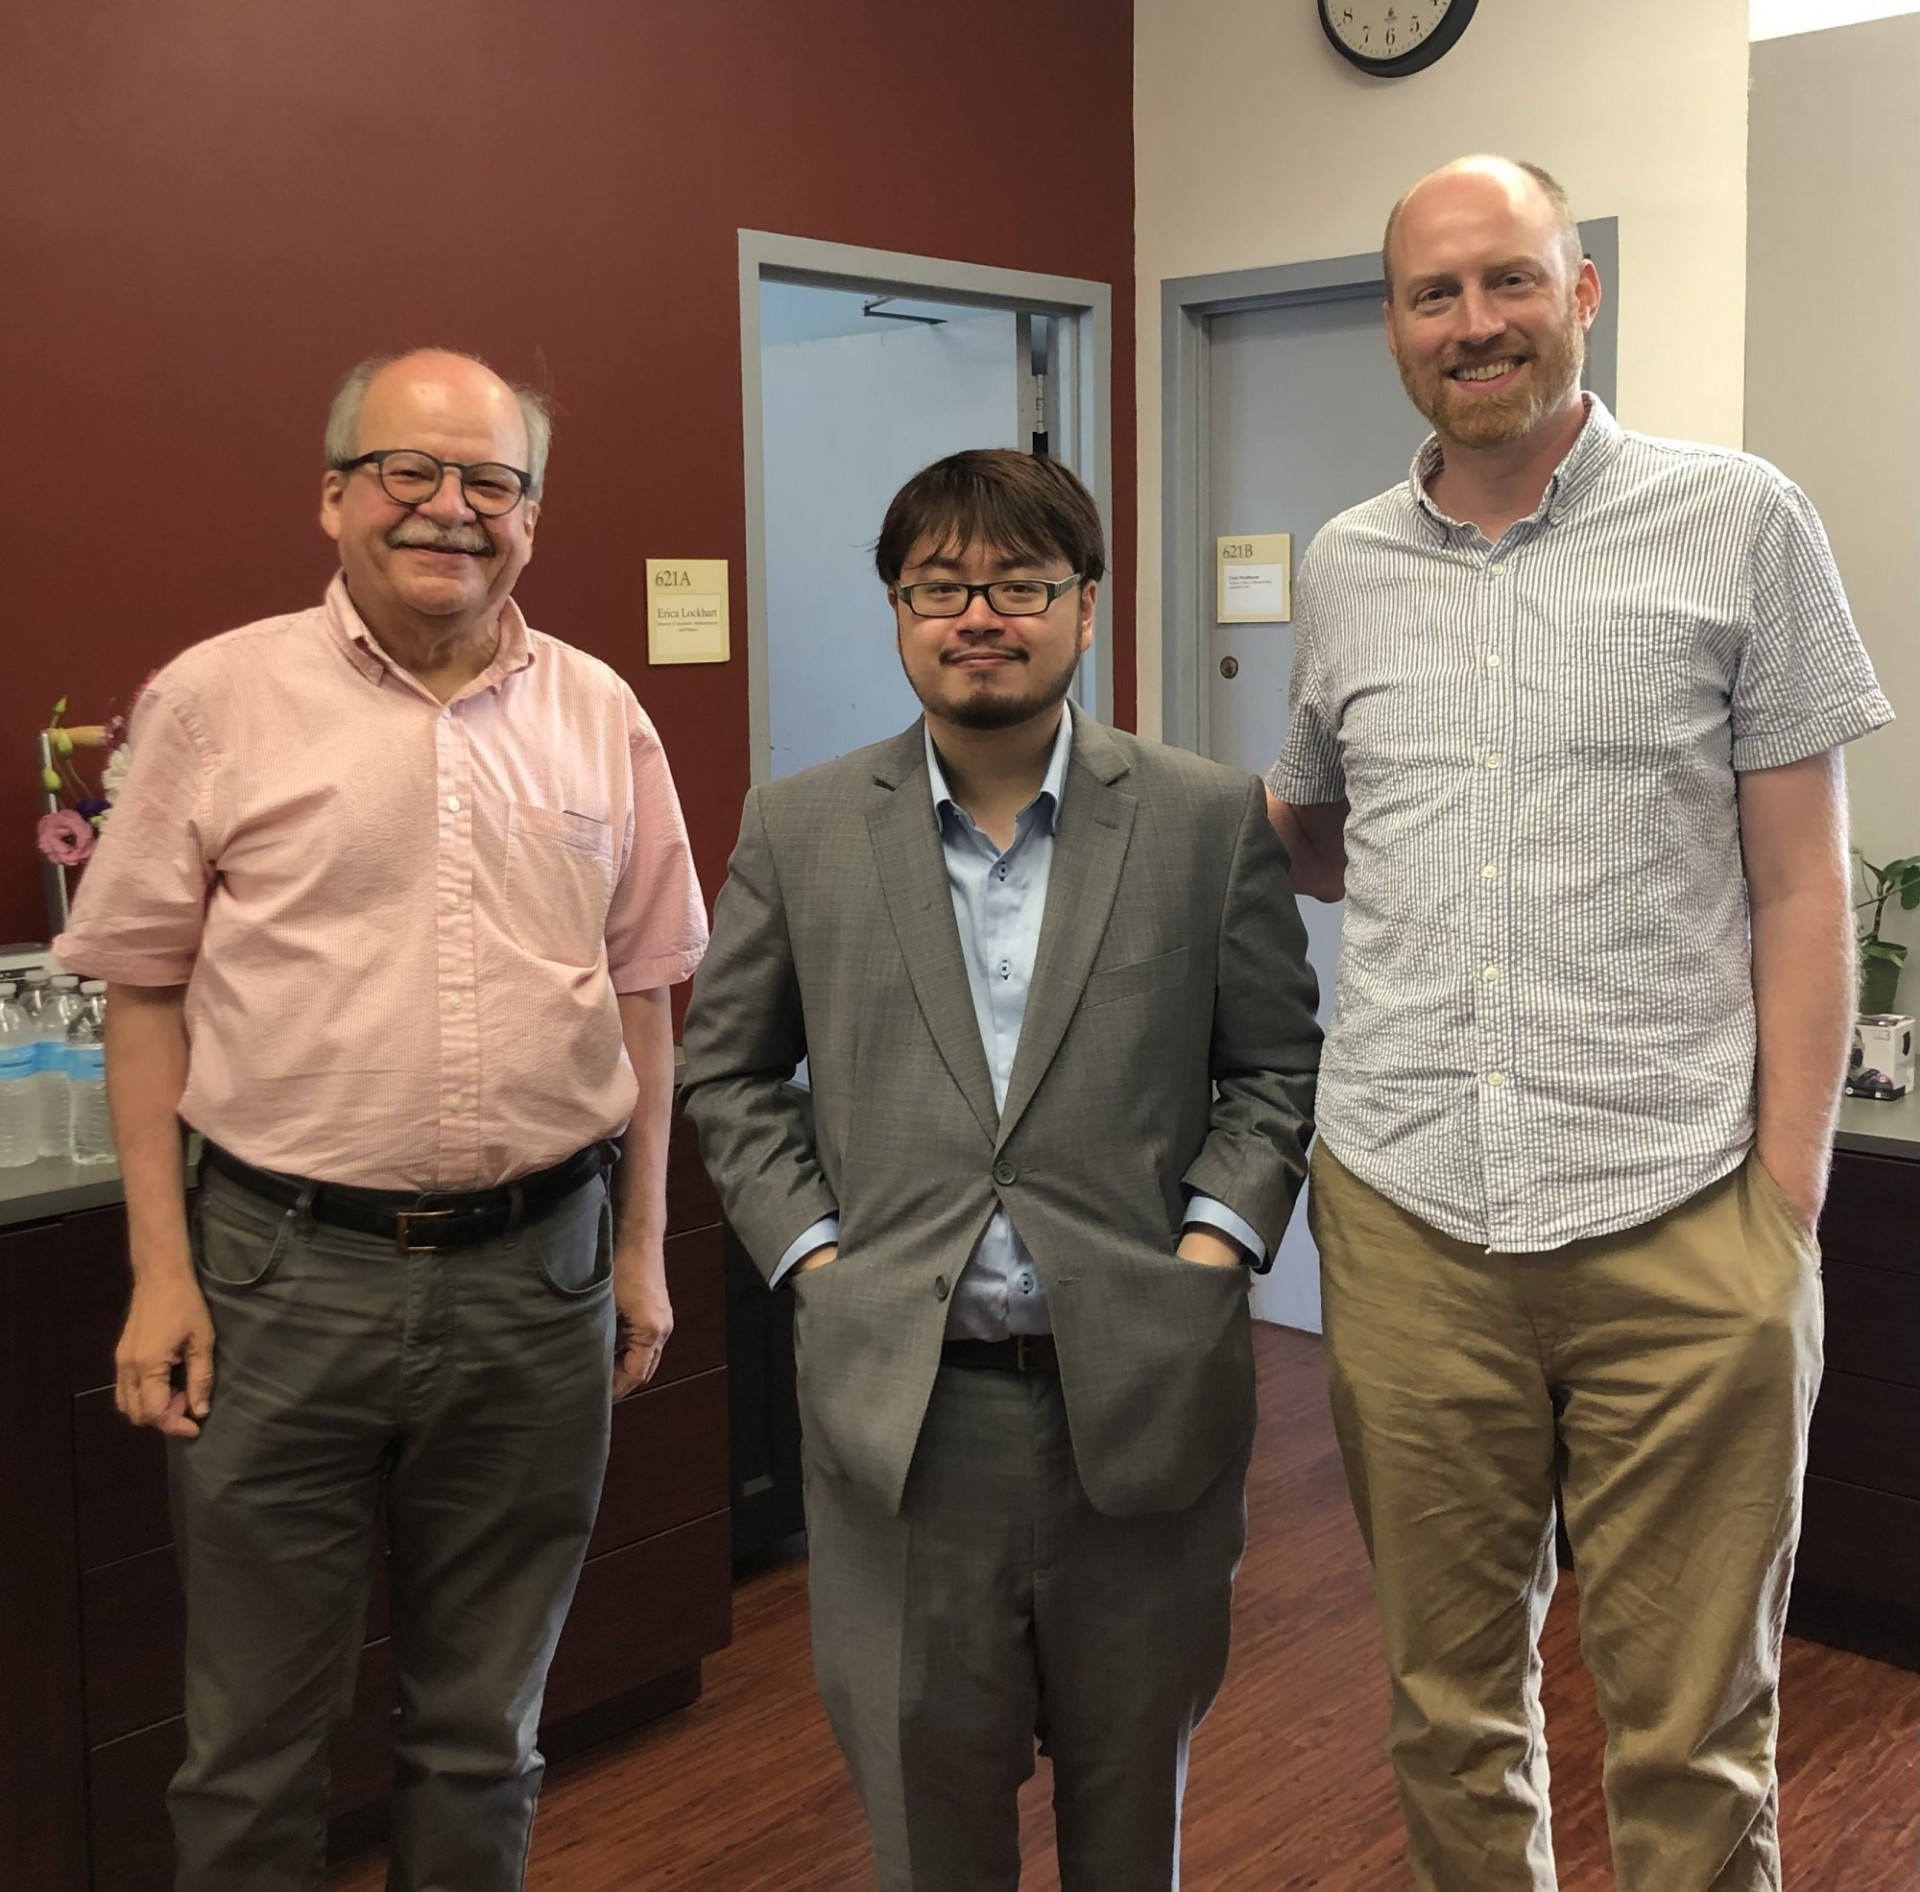 Photo of Joseph P. Dubiel (left), Cheng Lei Wei (middle), and Benjamin Adam Steege (right)